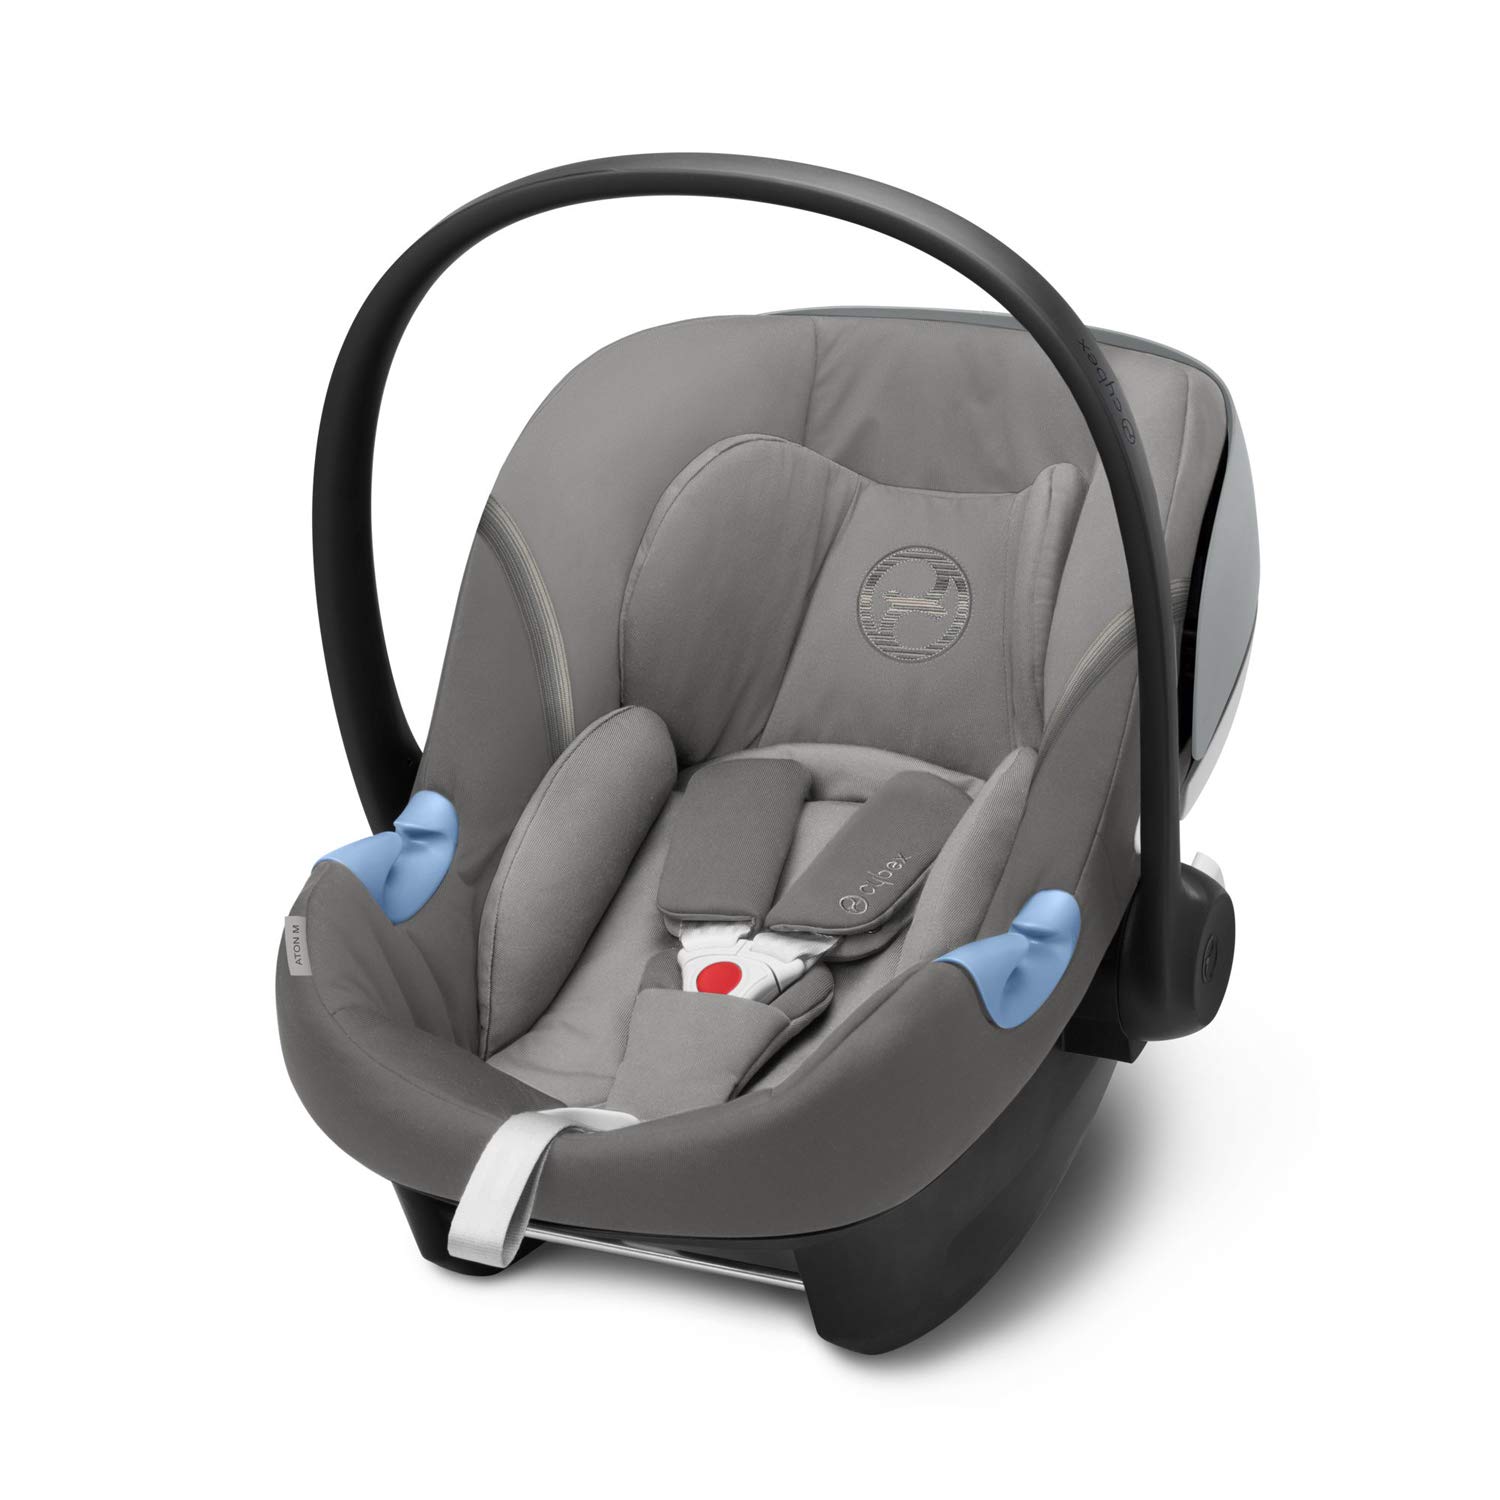 CYBEX Gold Aton M i-Size Car Seat with Newborn Insert. For Children from 45